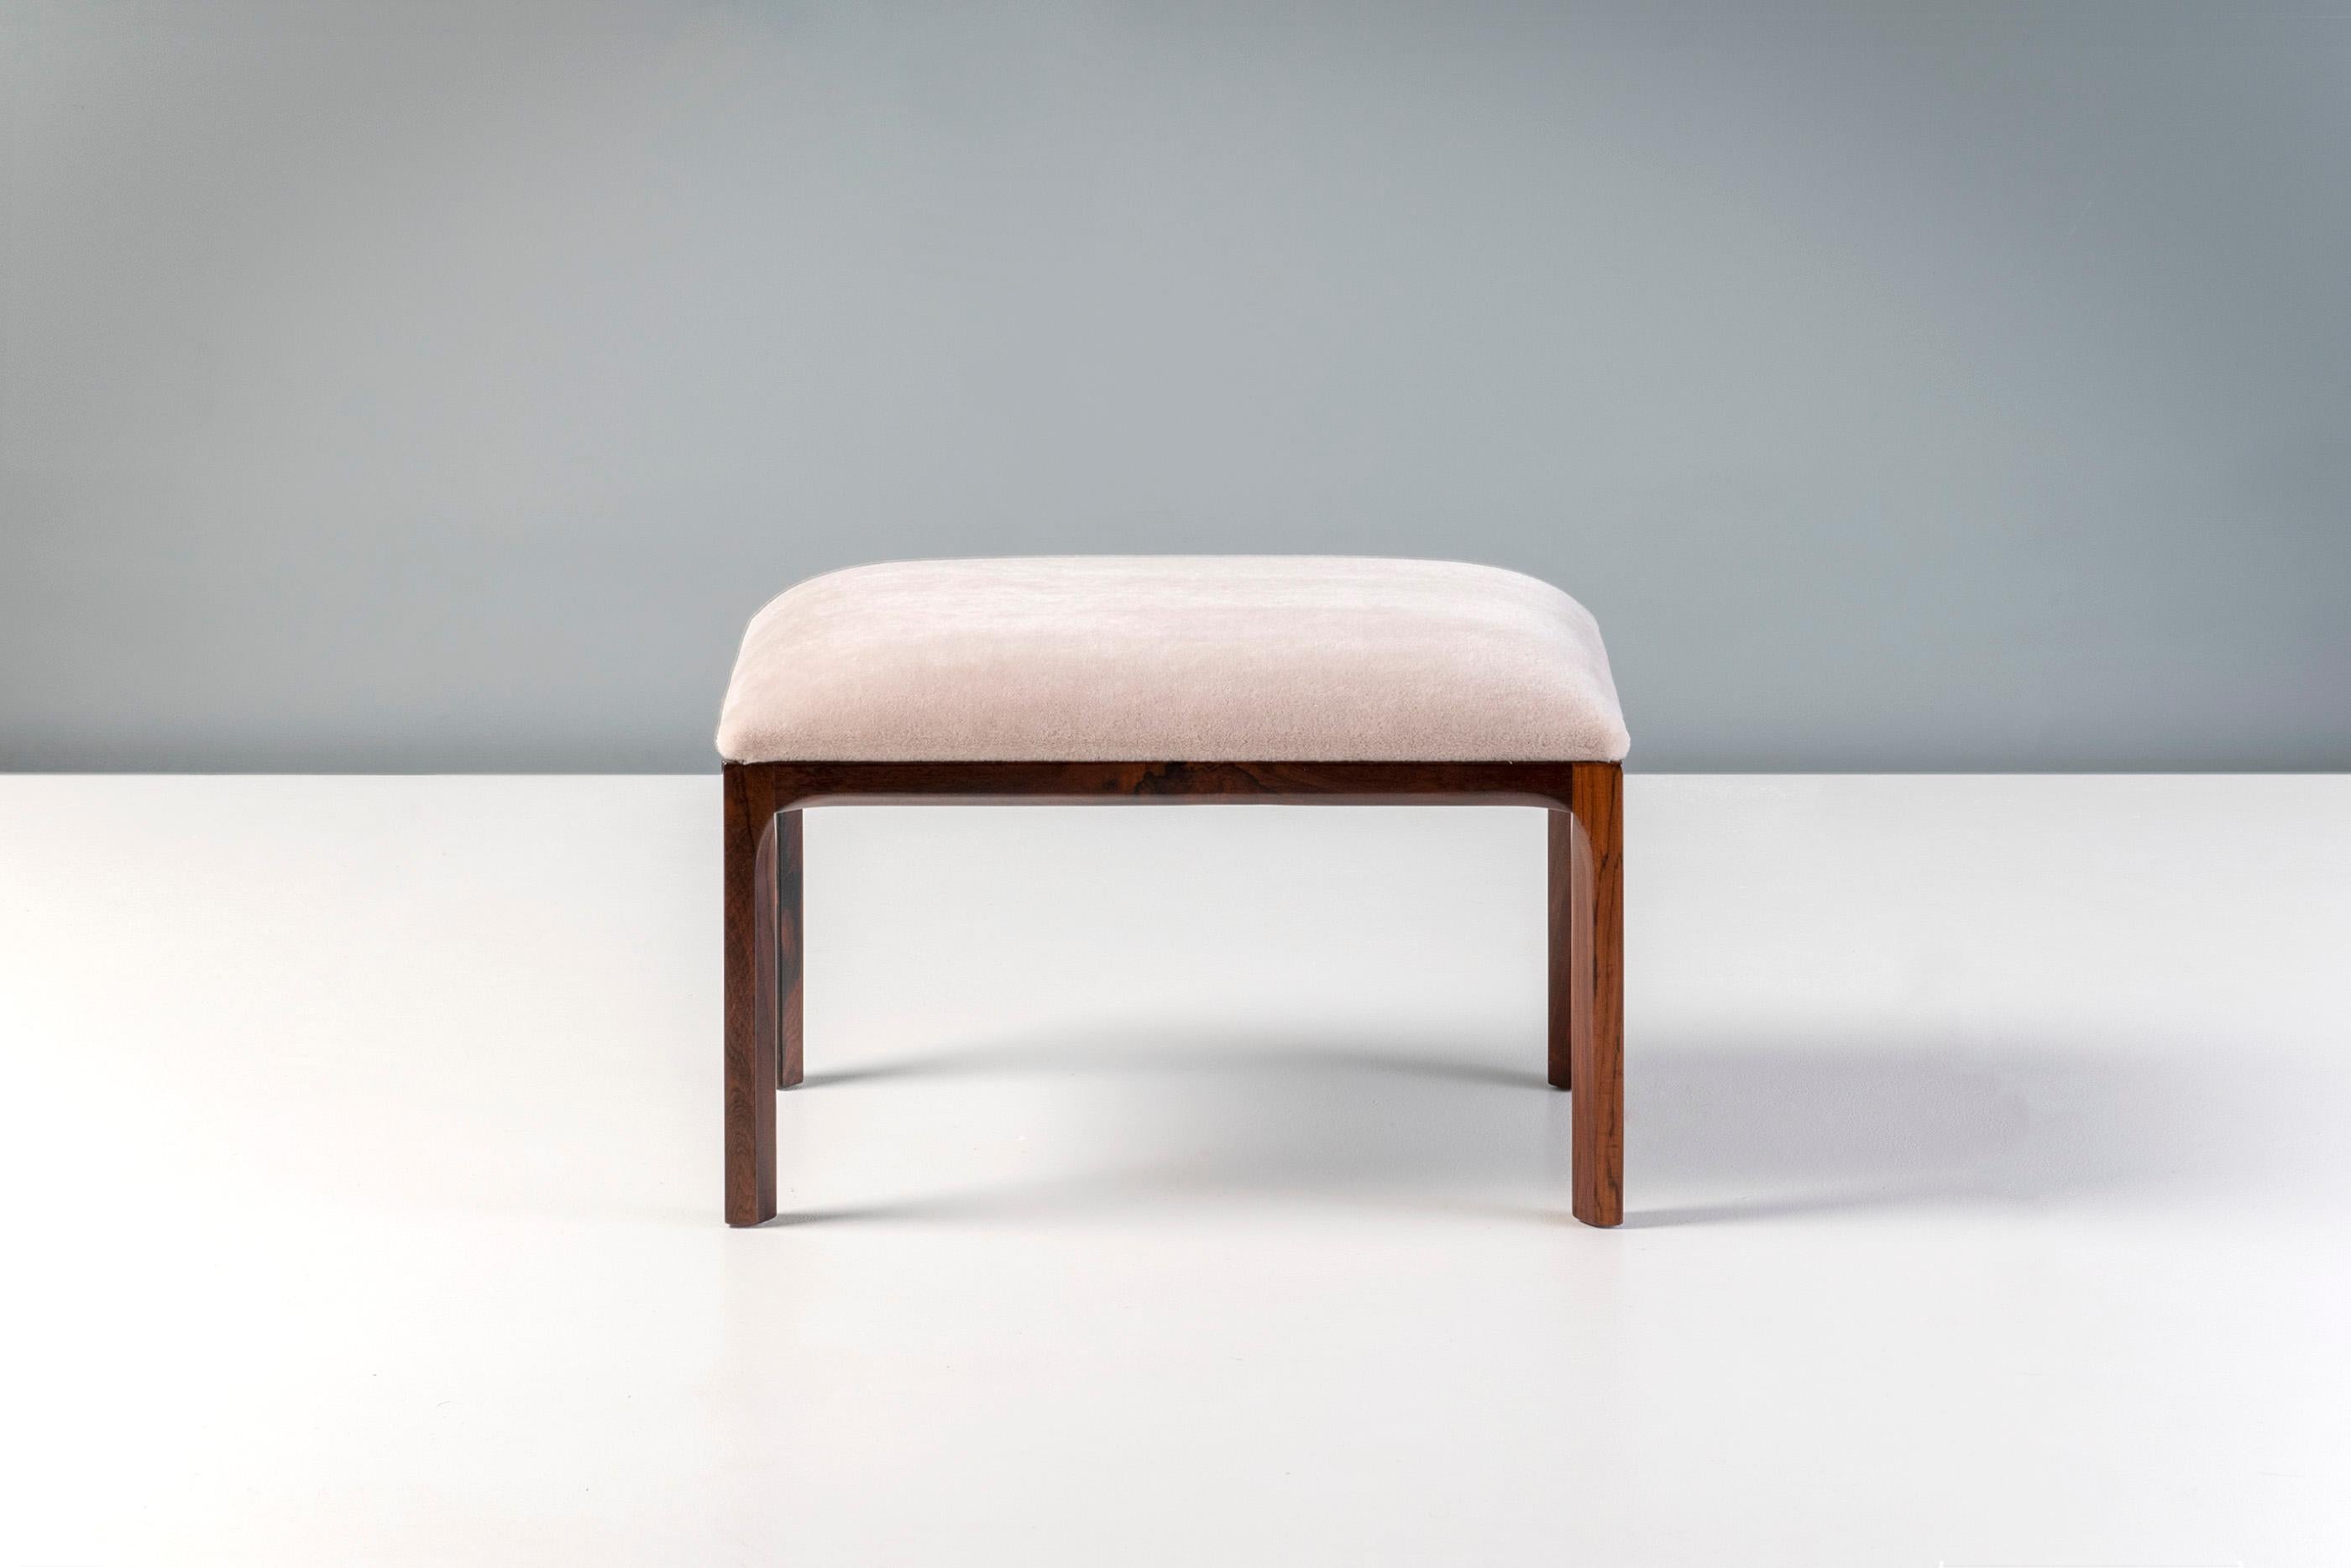 Kai Kristiansen - Rosewood Ottomans, c1950s.

Elegant rosewood frame ottomans produced by Aksel Kjersgaard in Denmark c1950s. The seats have been reupholstered in a blush pink Pierre Frey long-pile Teddy mohair.

W: 50cm  /  H: 41cm  /   D: 37cm